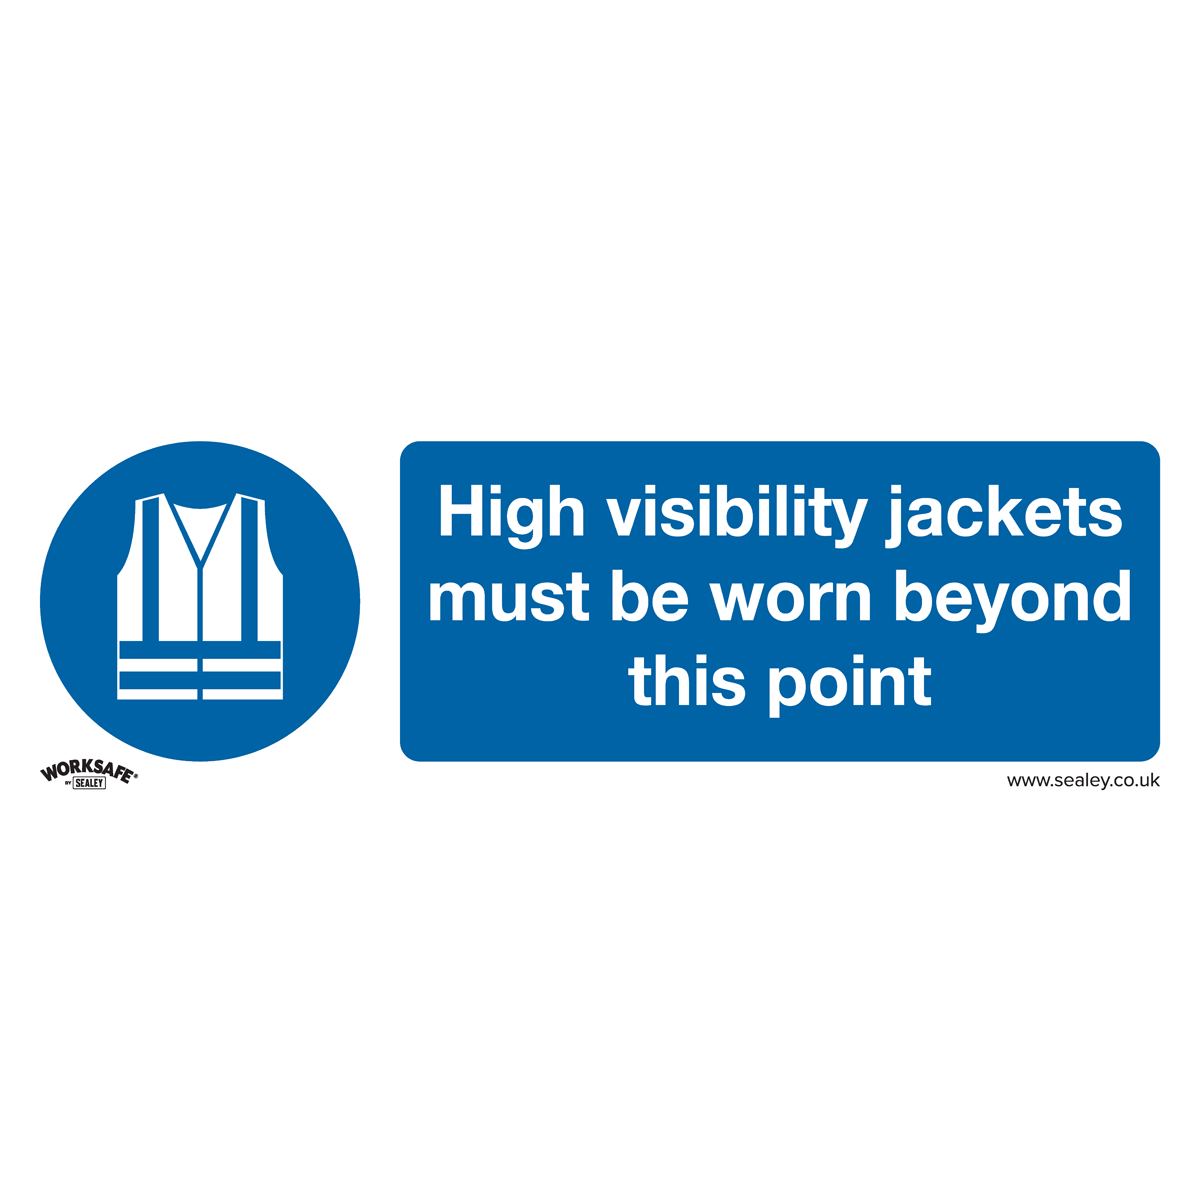 Sealey Mandatory Safety Sign - High Visibility Jackets Must Be Worn Beyond This Point - Self-Adhesive Vinyl